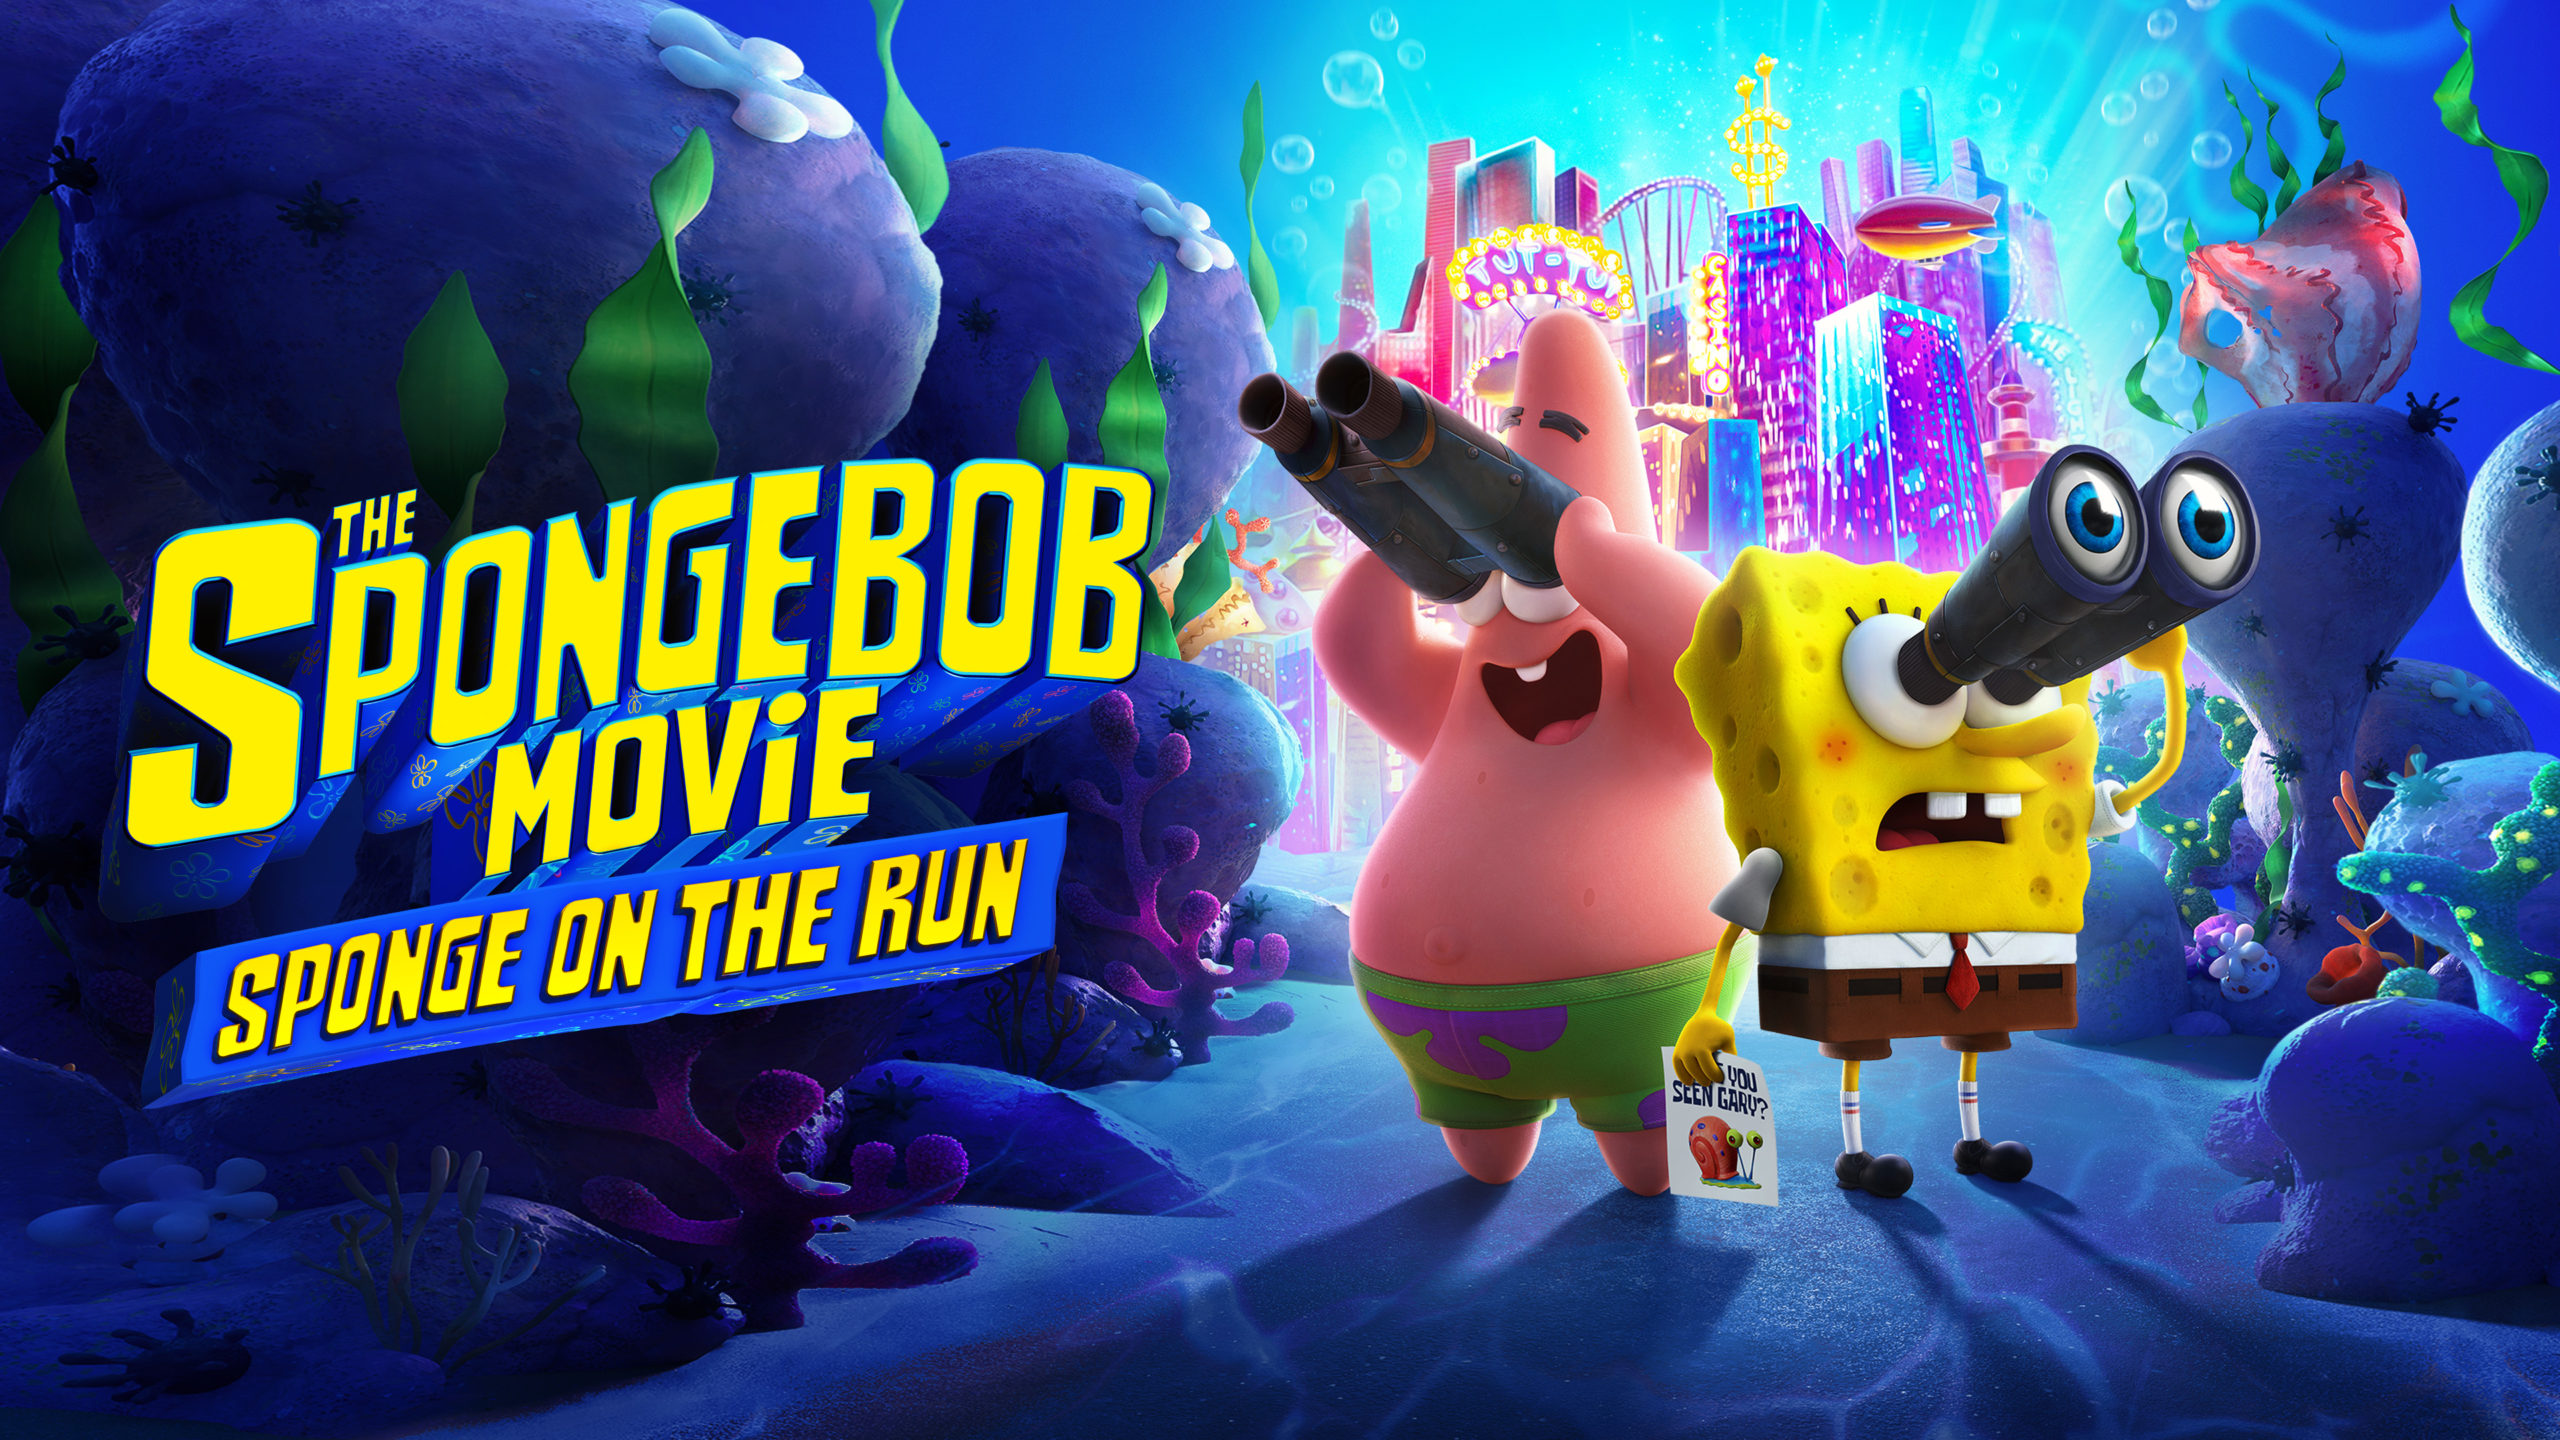 Tom Kenny and Bill Fagerbakke on Returning for The SpongeBob Movie: Sponge on the Run [Exclusive Interview]